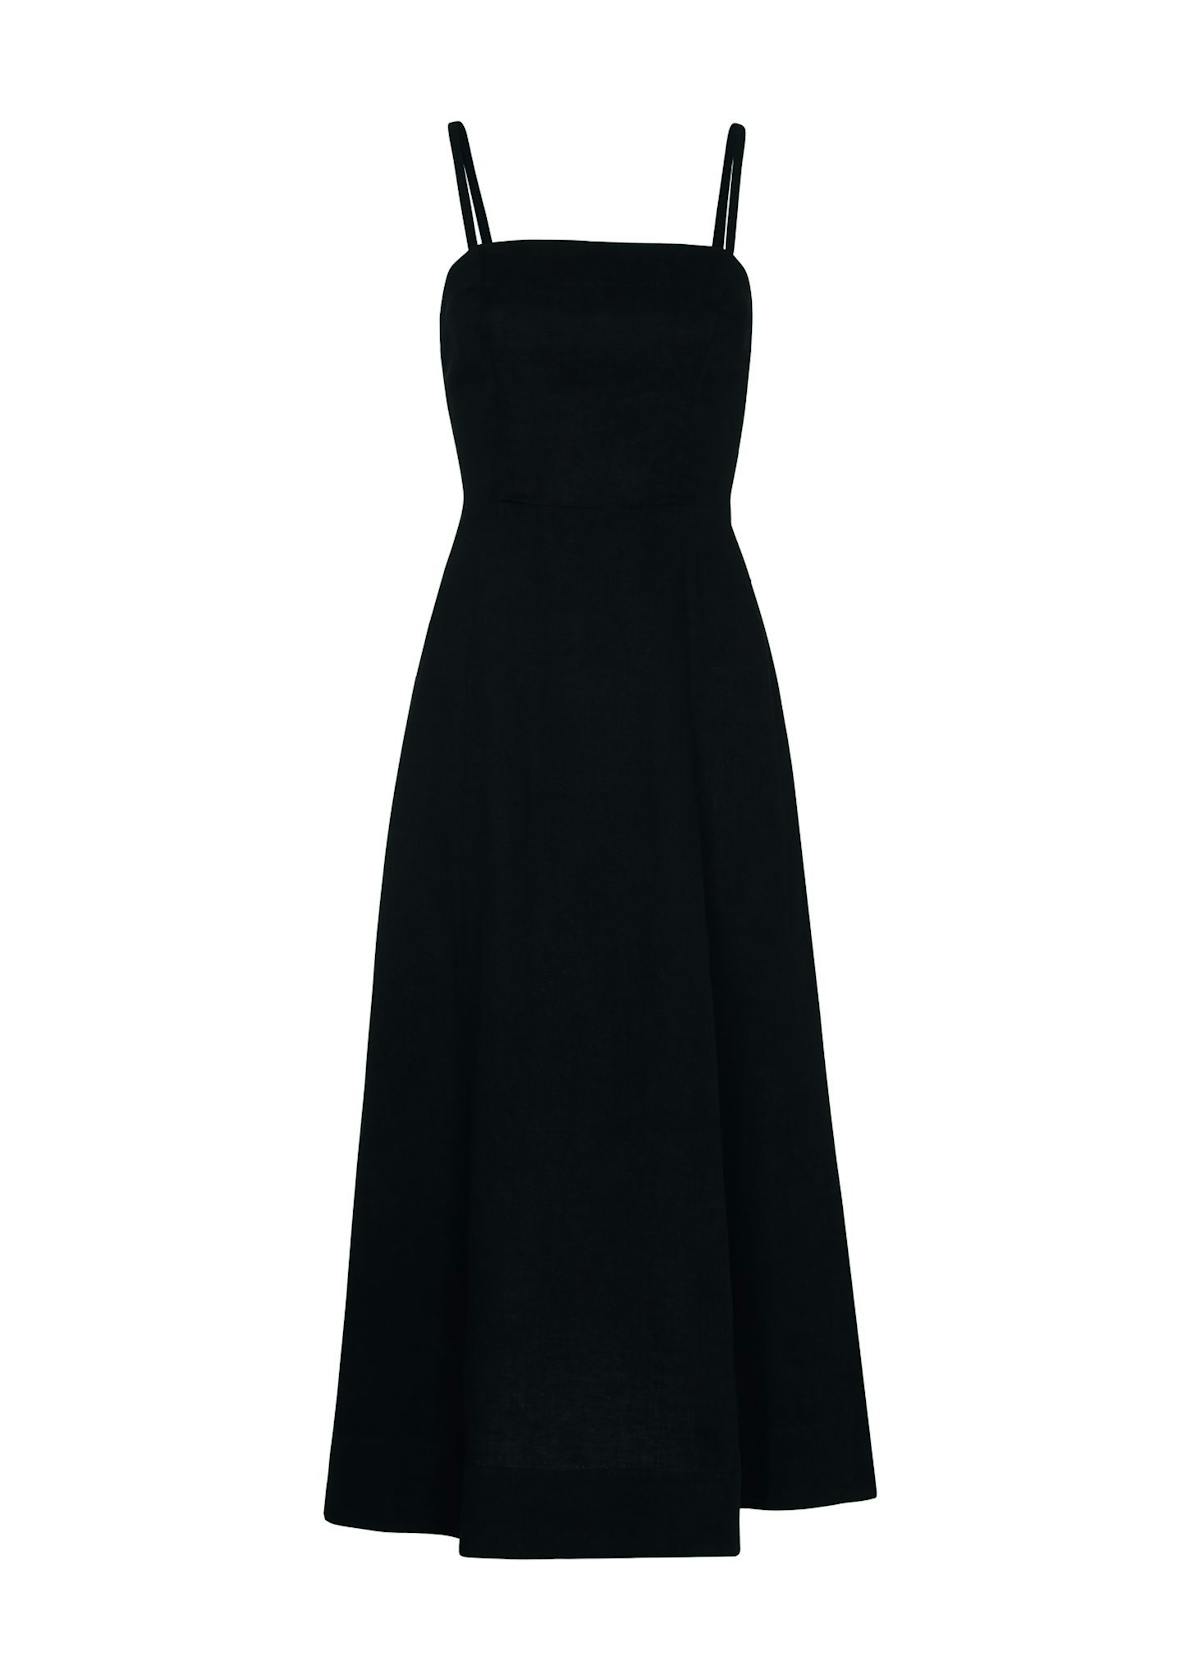 Best black dresses like Marianne from Normal People